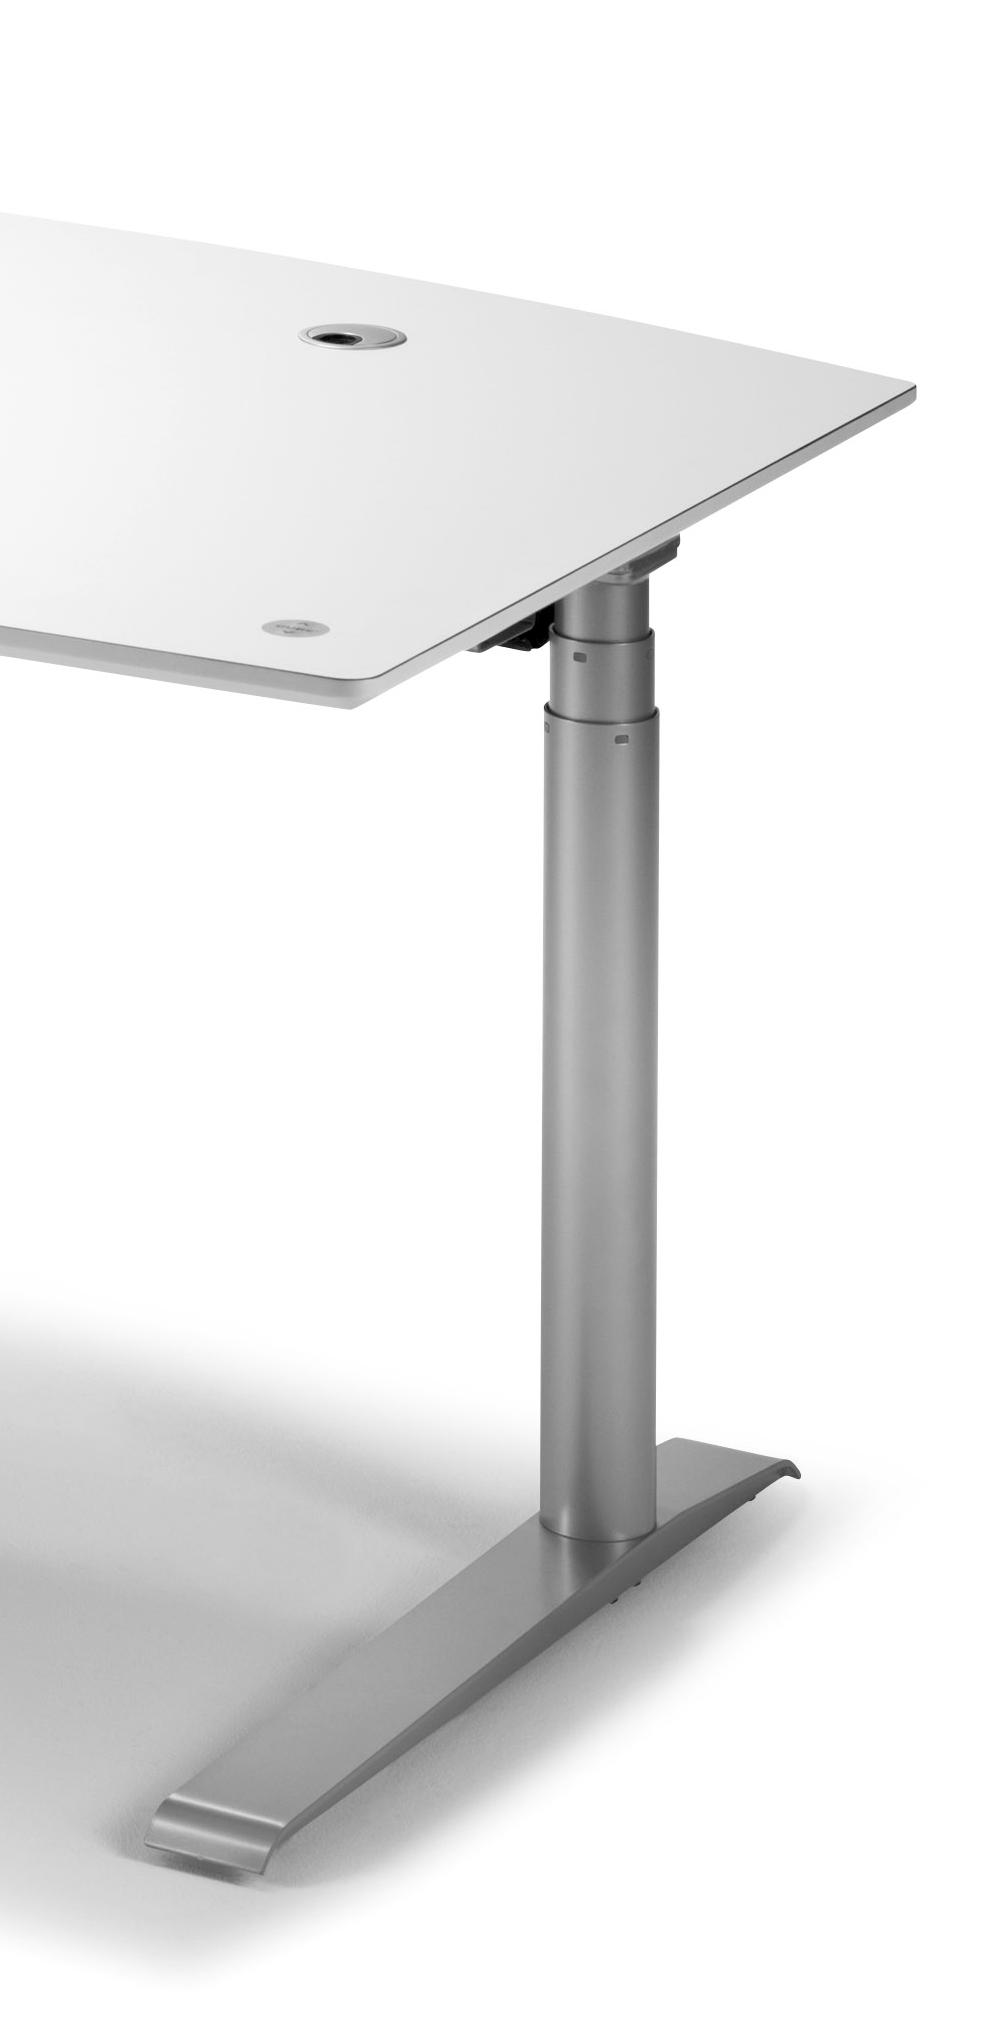 DIONE DESKS With sit-stand function Table top in 23 mm MDF with bevelled edge.